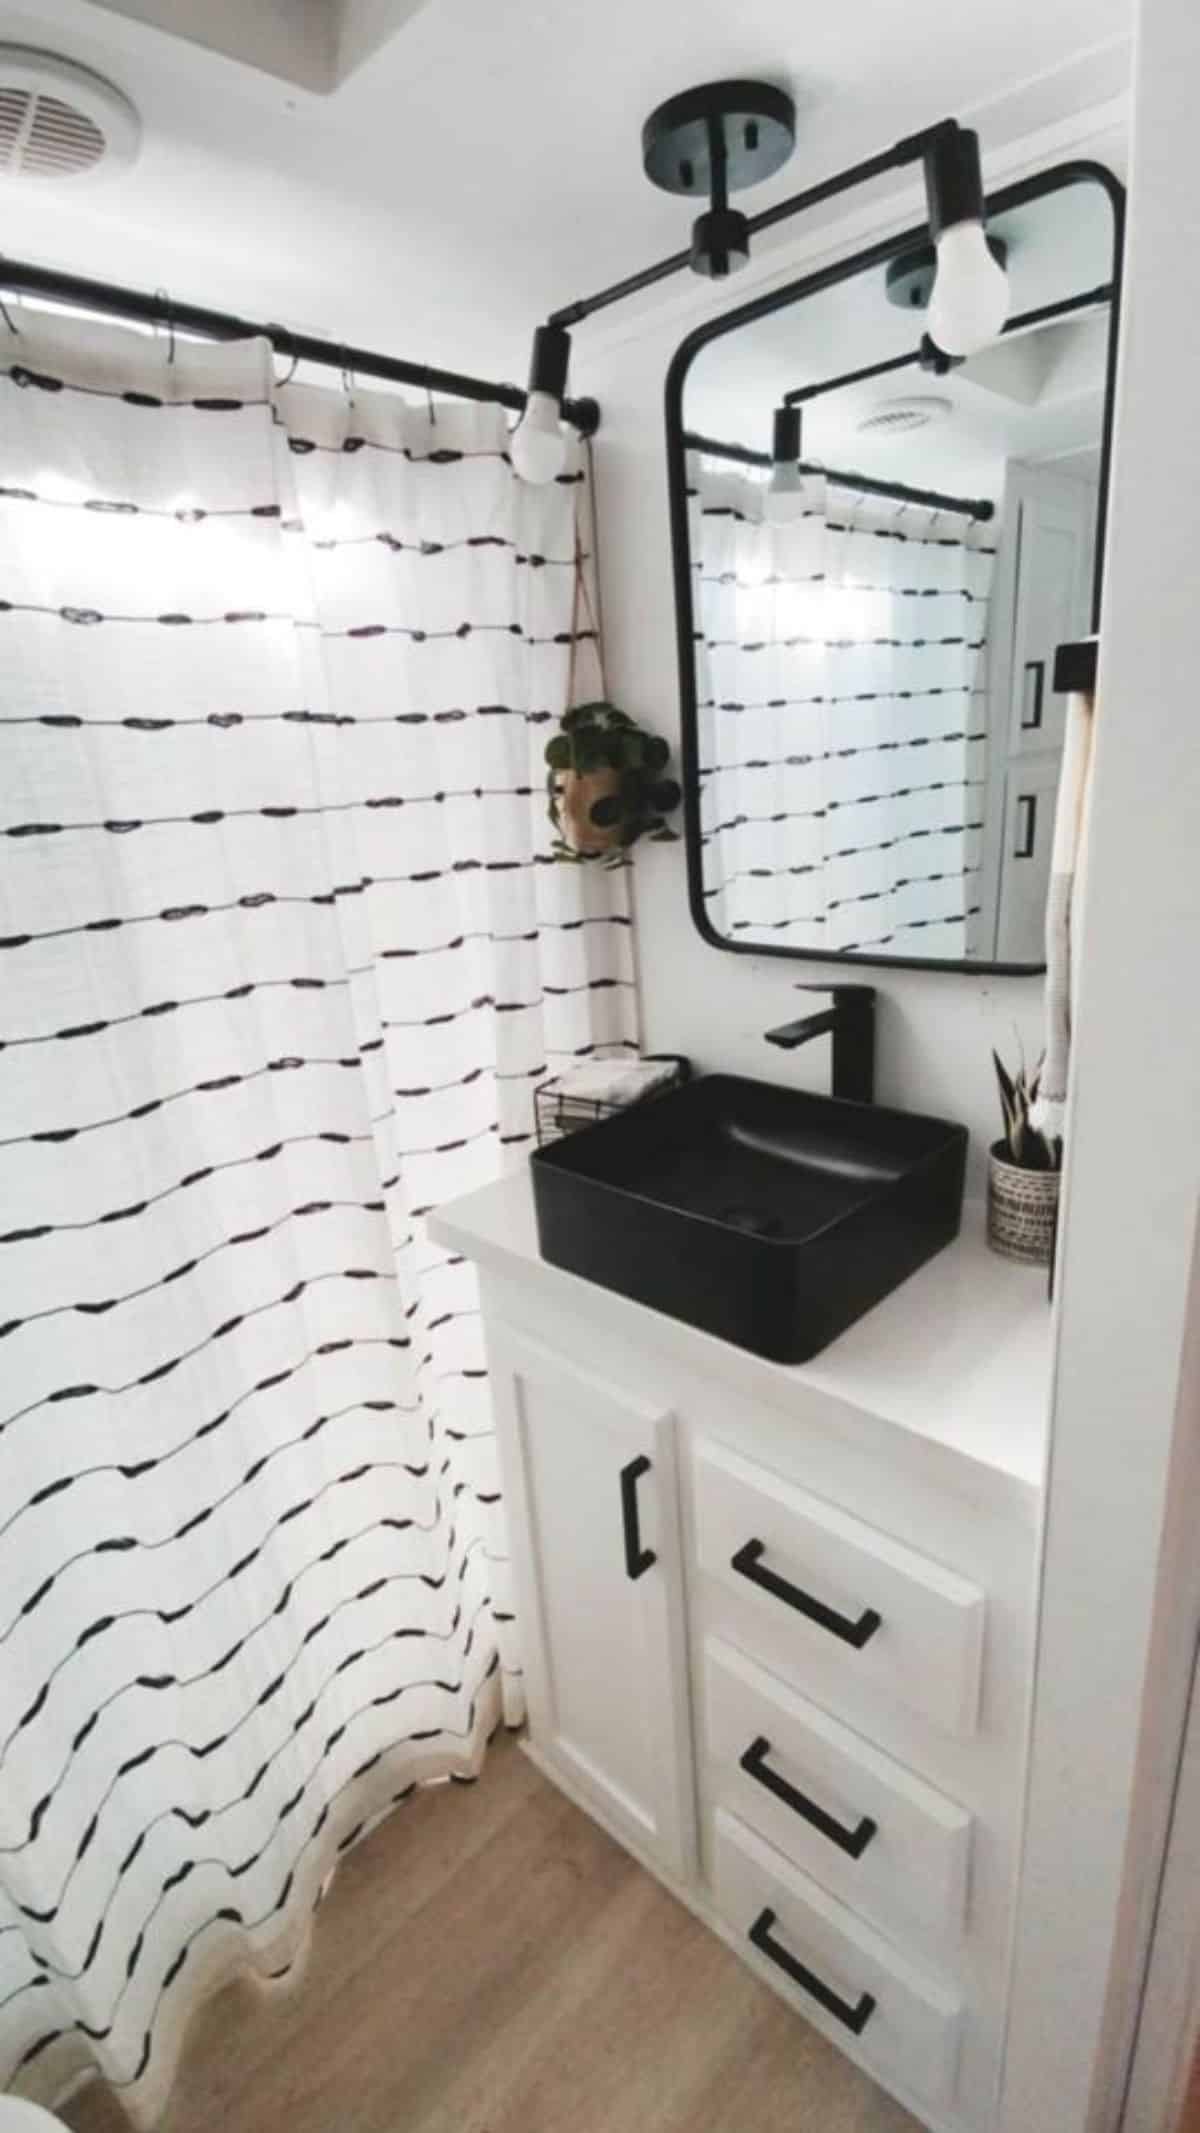 bathroom of 40' renovated tiny home has all the standard fittings